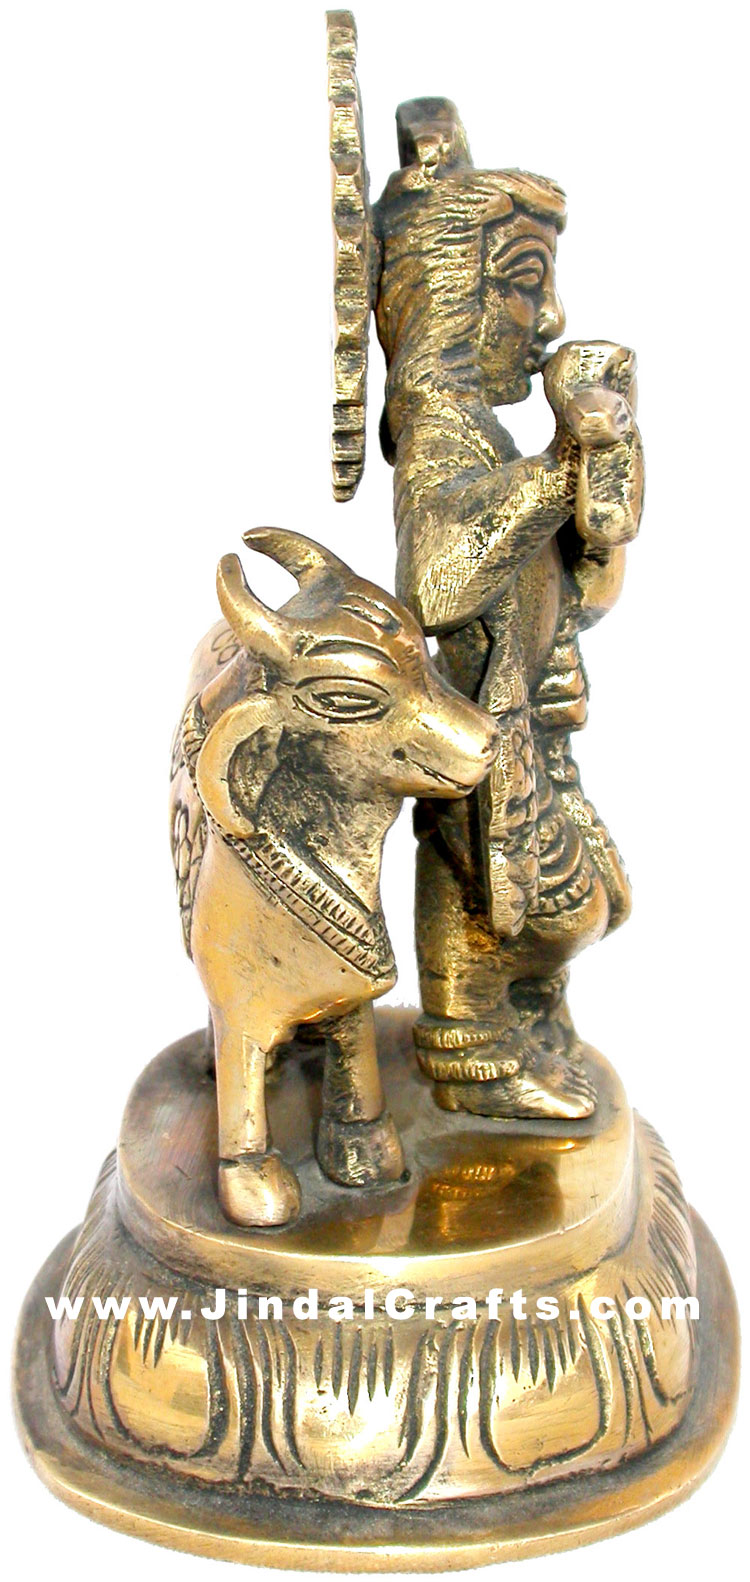 Lord Krishna Indian God Religious Sculpture Brass India